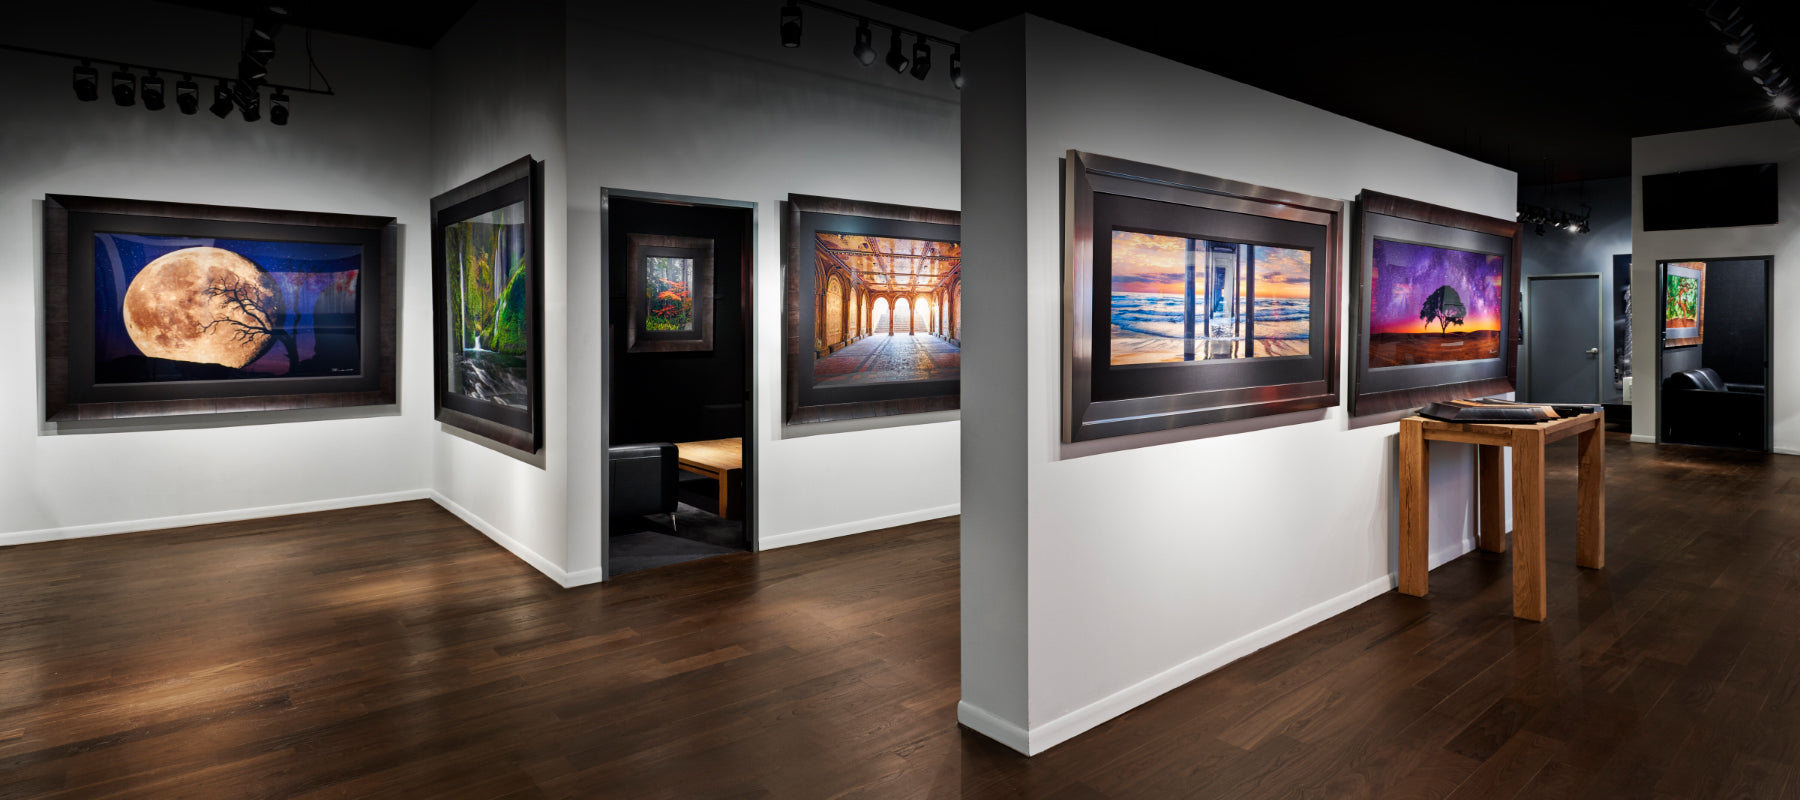 LIK Fine Art Gallery interior with white and gray walls and brown wood floors displaying framed photography by Peter Lik